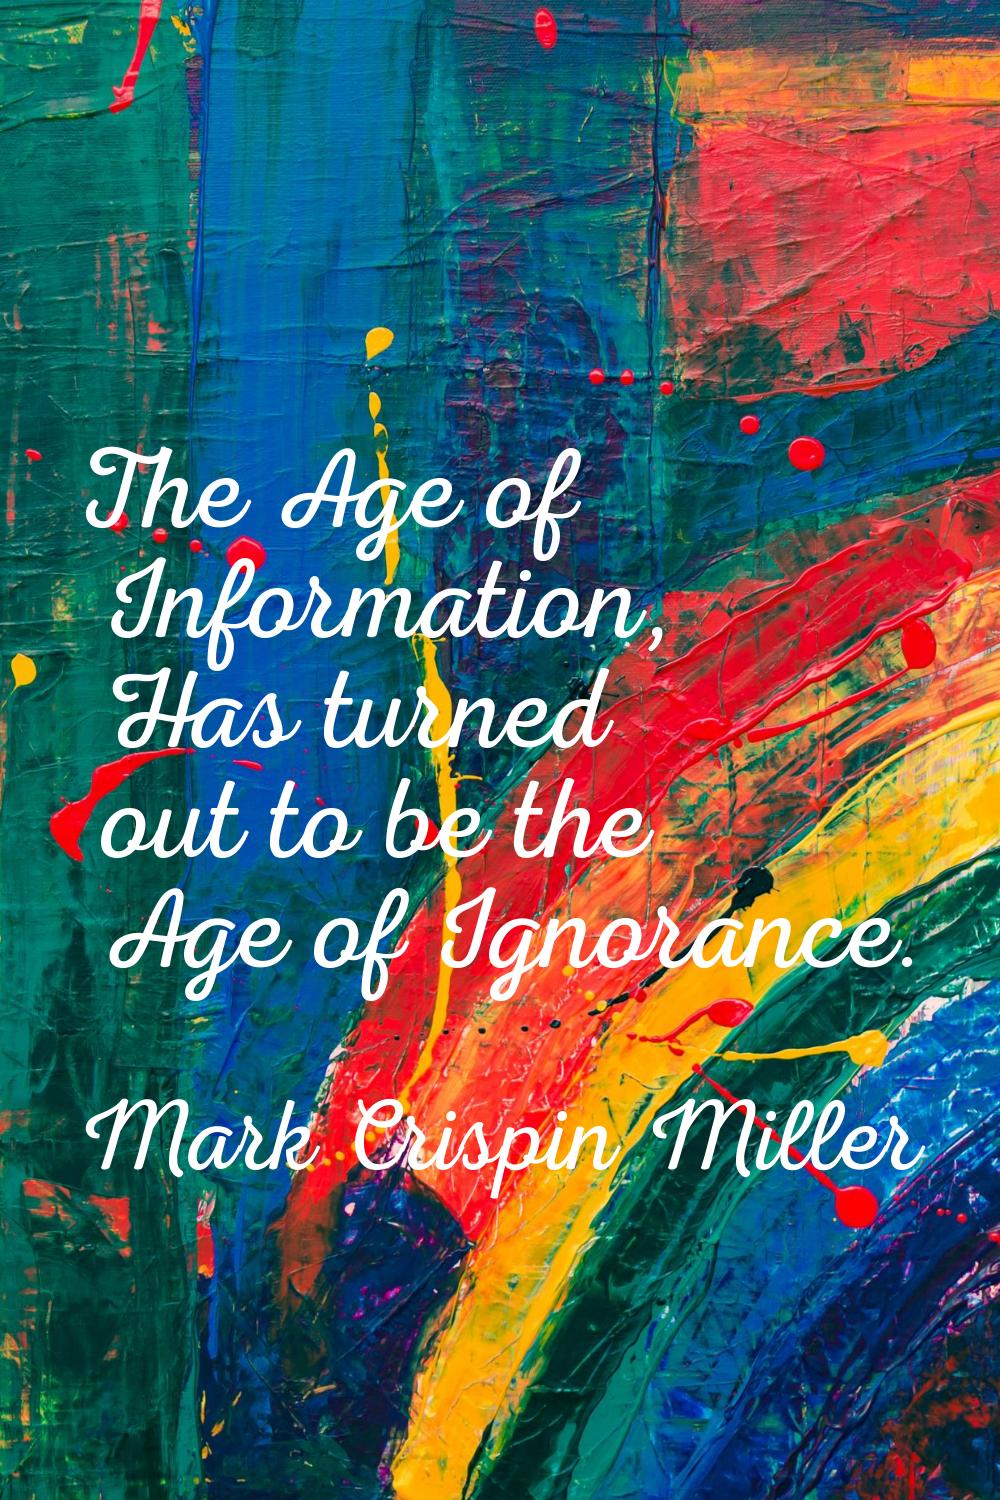 The Age of Information, Has turned out to be the Age of Ignorance.